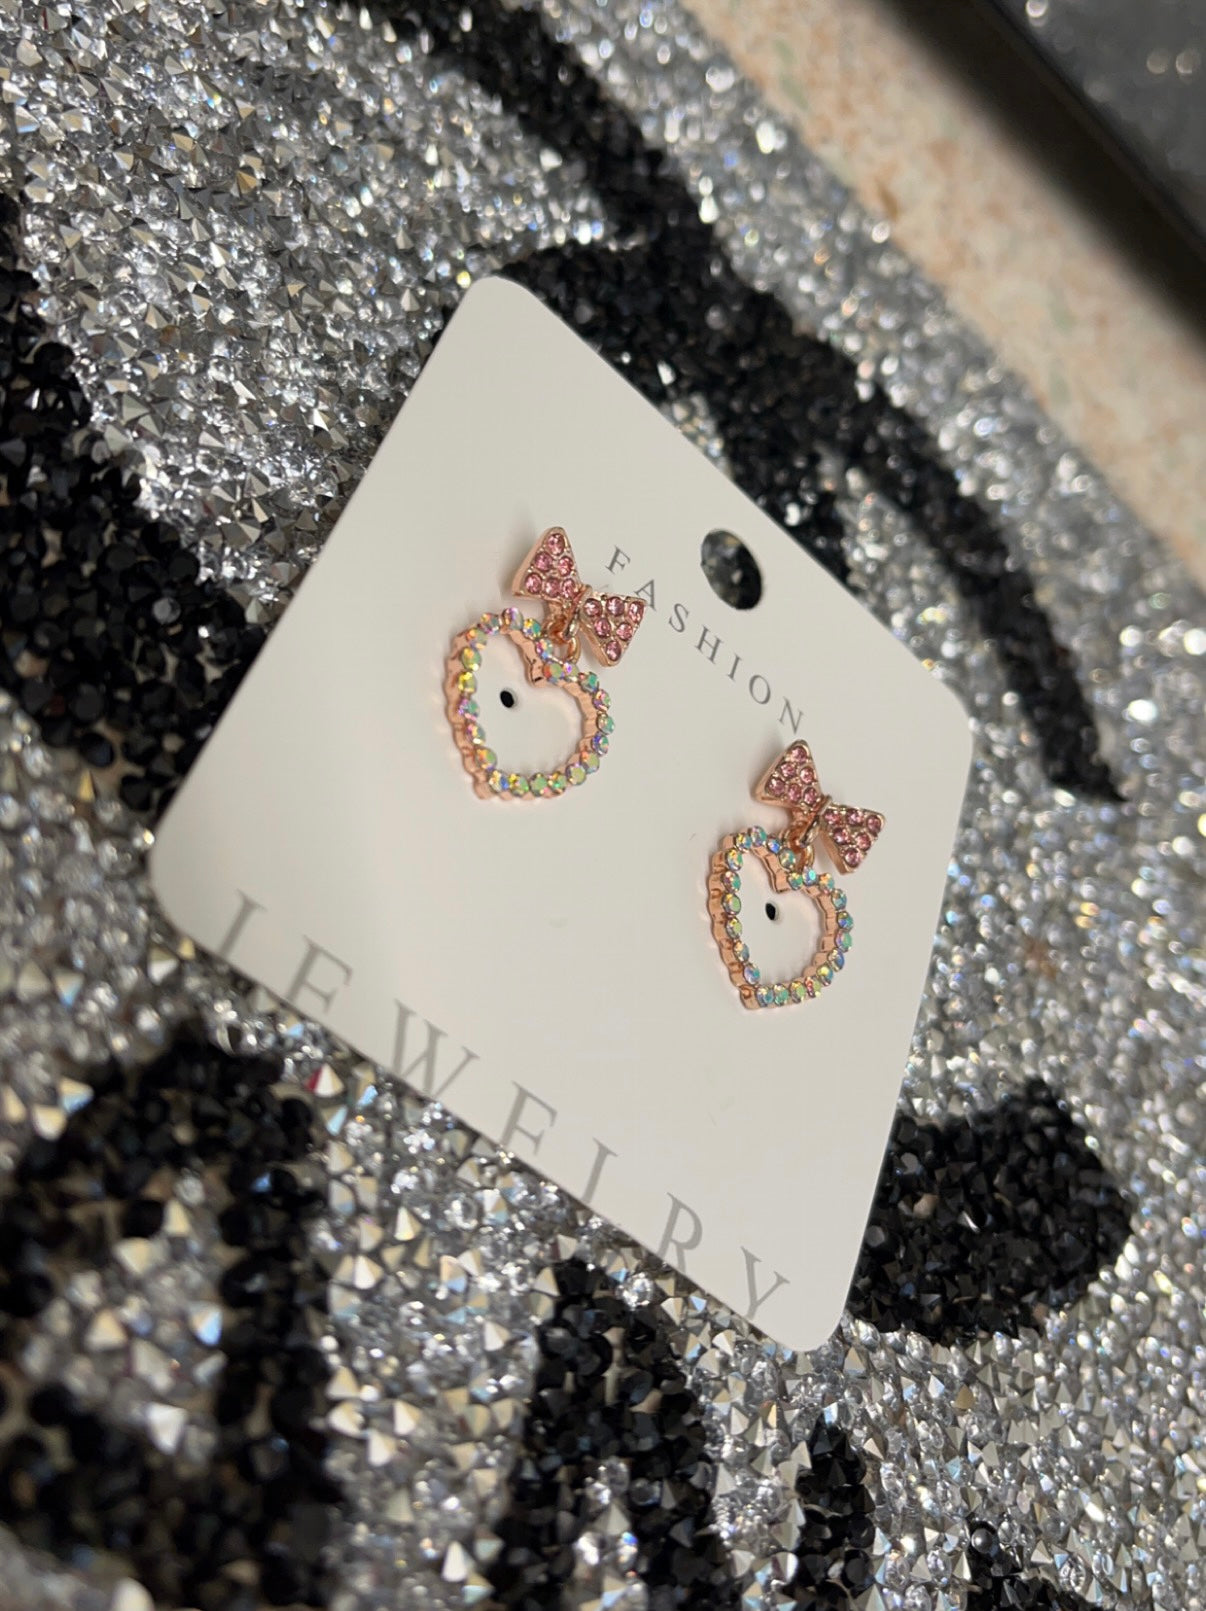 Heart & Bow Sparkly Drop Earrings